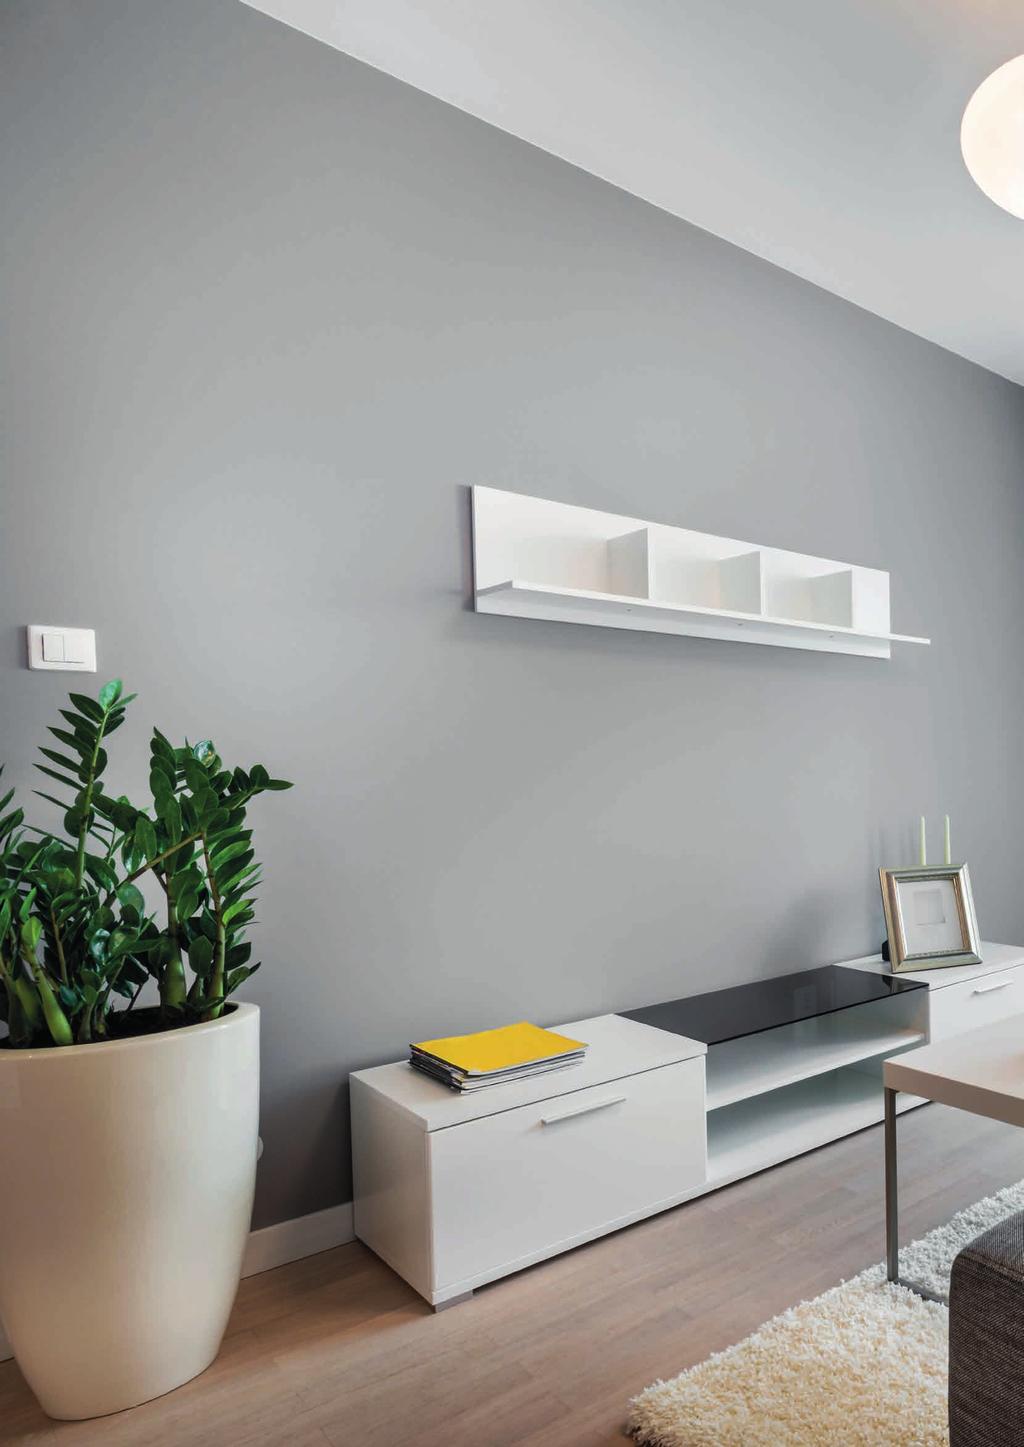 Why a Hitachi wall split is the quiet achiever Hitachi wall split units can exert an almost instant effect in even the most challenging of summer or winter conditions.